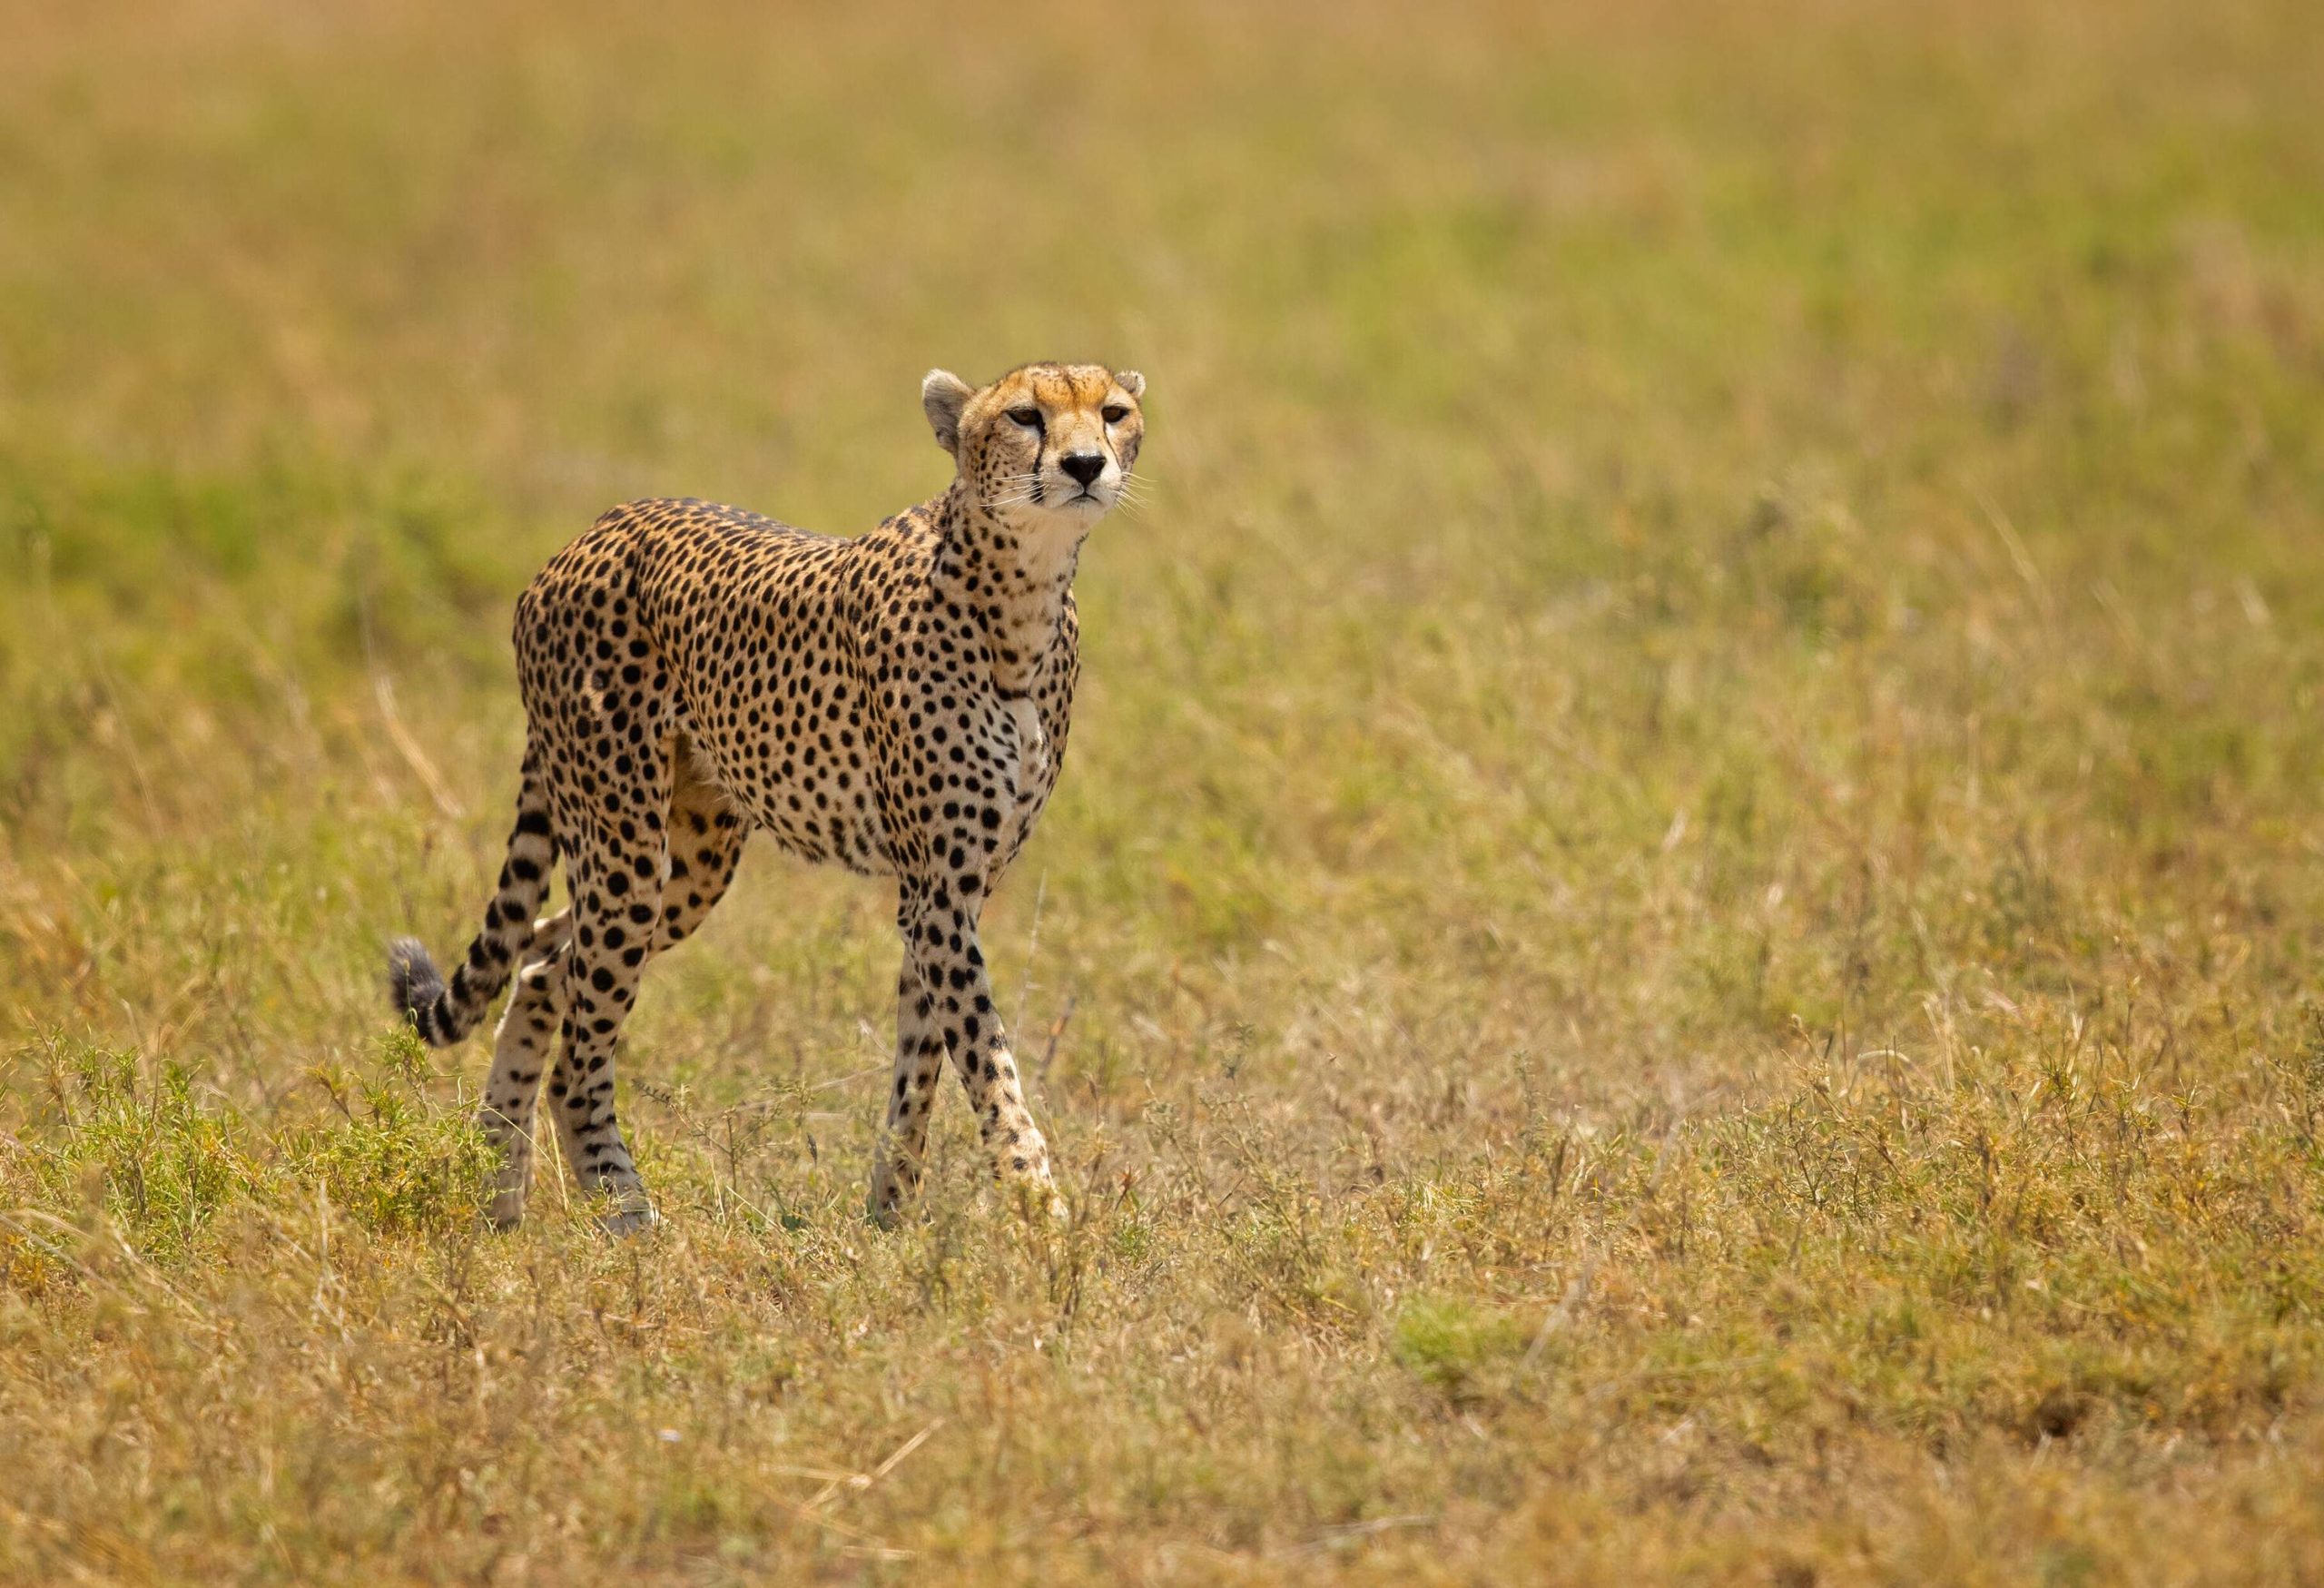 A majestic cheetah standing confidently on a grassy landscape, showcasing its strength and elegance.